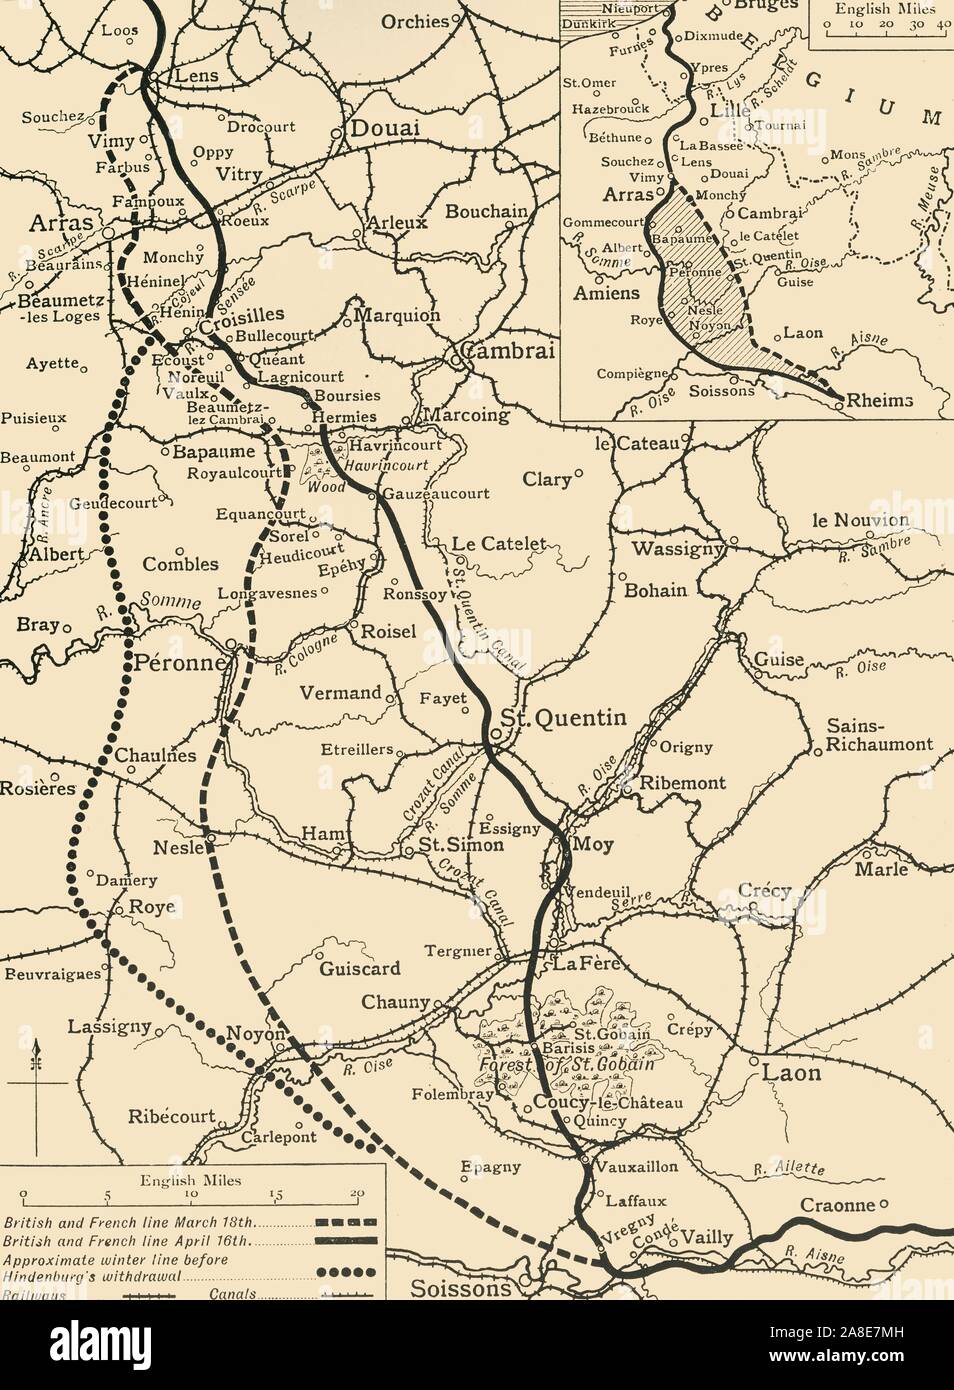 'Map illustrating the German Retirement after the Battle of the Somme', (c1920). The First World War Battle of the Somme, fought between the armies of the British Empire and French Third Republic against the German Empire, took place between 1 July and 18 November 1916 on both sides of the River Somme in northern France. Showing the British and French lines, 'Approximate winter line before [Field Marshal von] Hindenburg's withdrawal', railways and canals. From &quot;The Great World War: A History&quot;, Volume VII, edited by Frank A Mumby. [The Gresham Publishing Company Ltd, London, c1920] Stock Photo